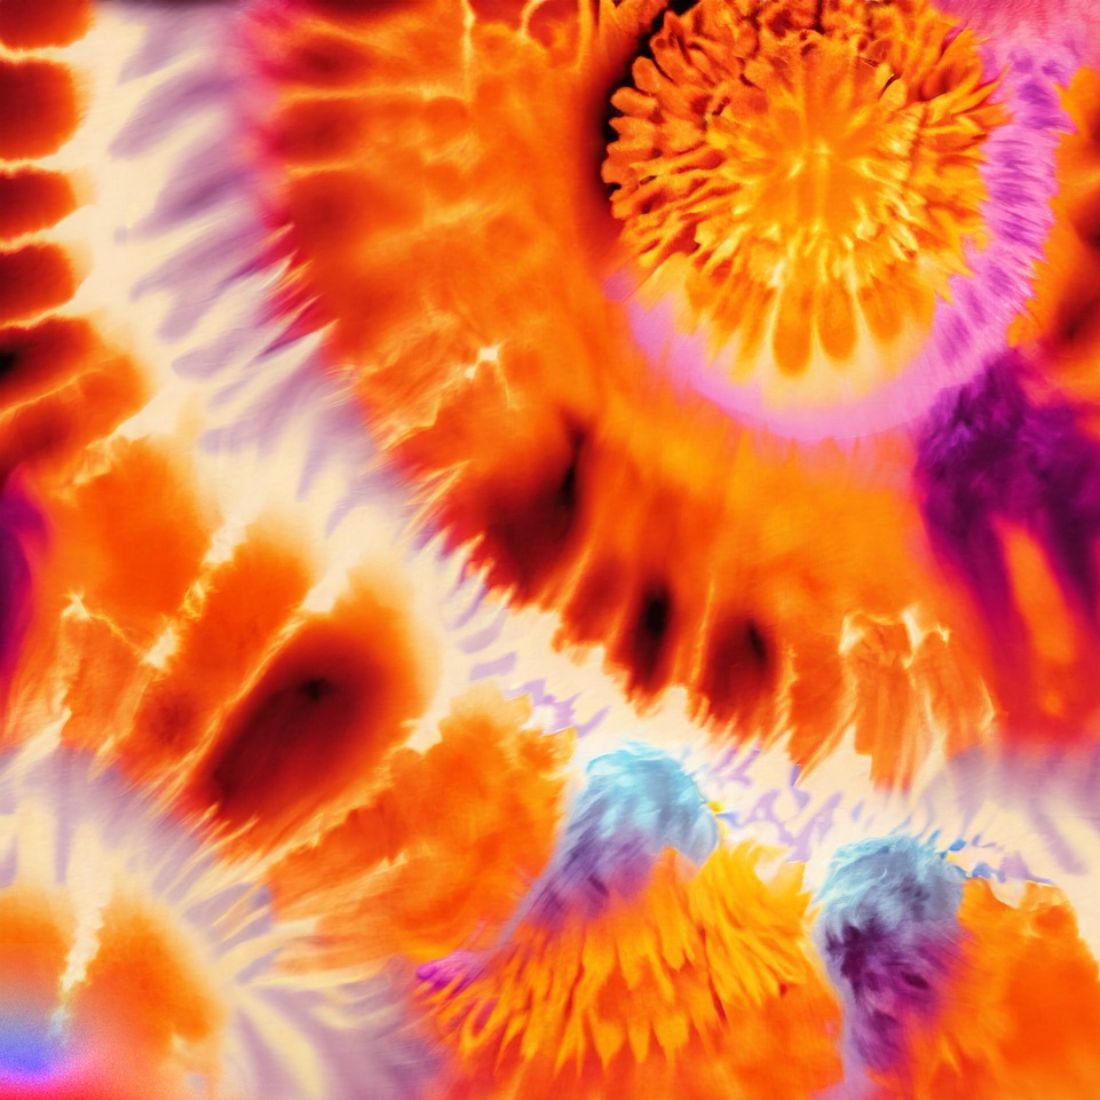 4 tie-dye background images in purple-orange cover image.